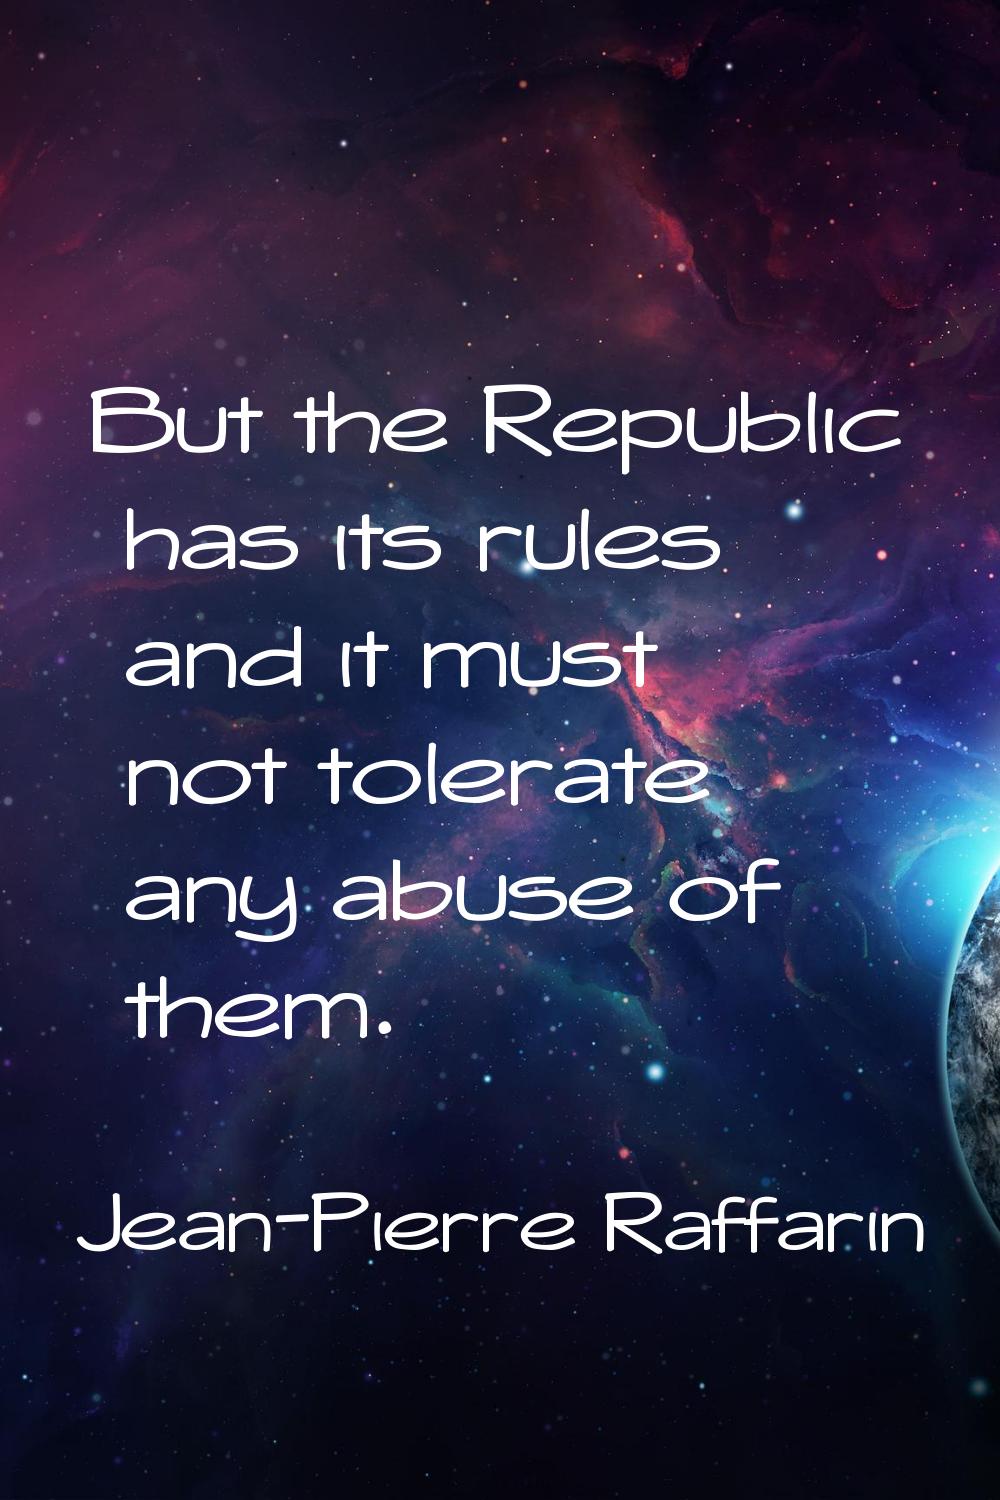 But the Republic has its rules and it must not tolerate any abuse of them.